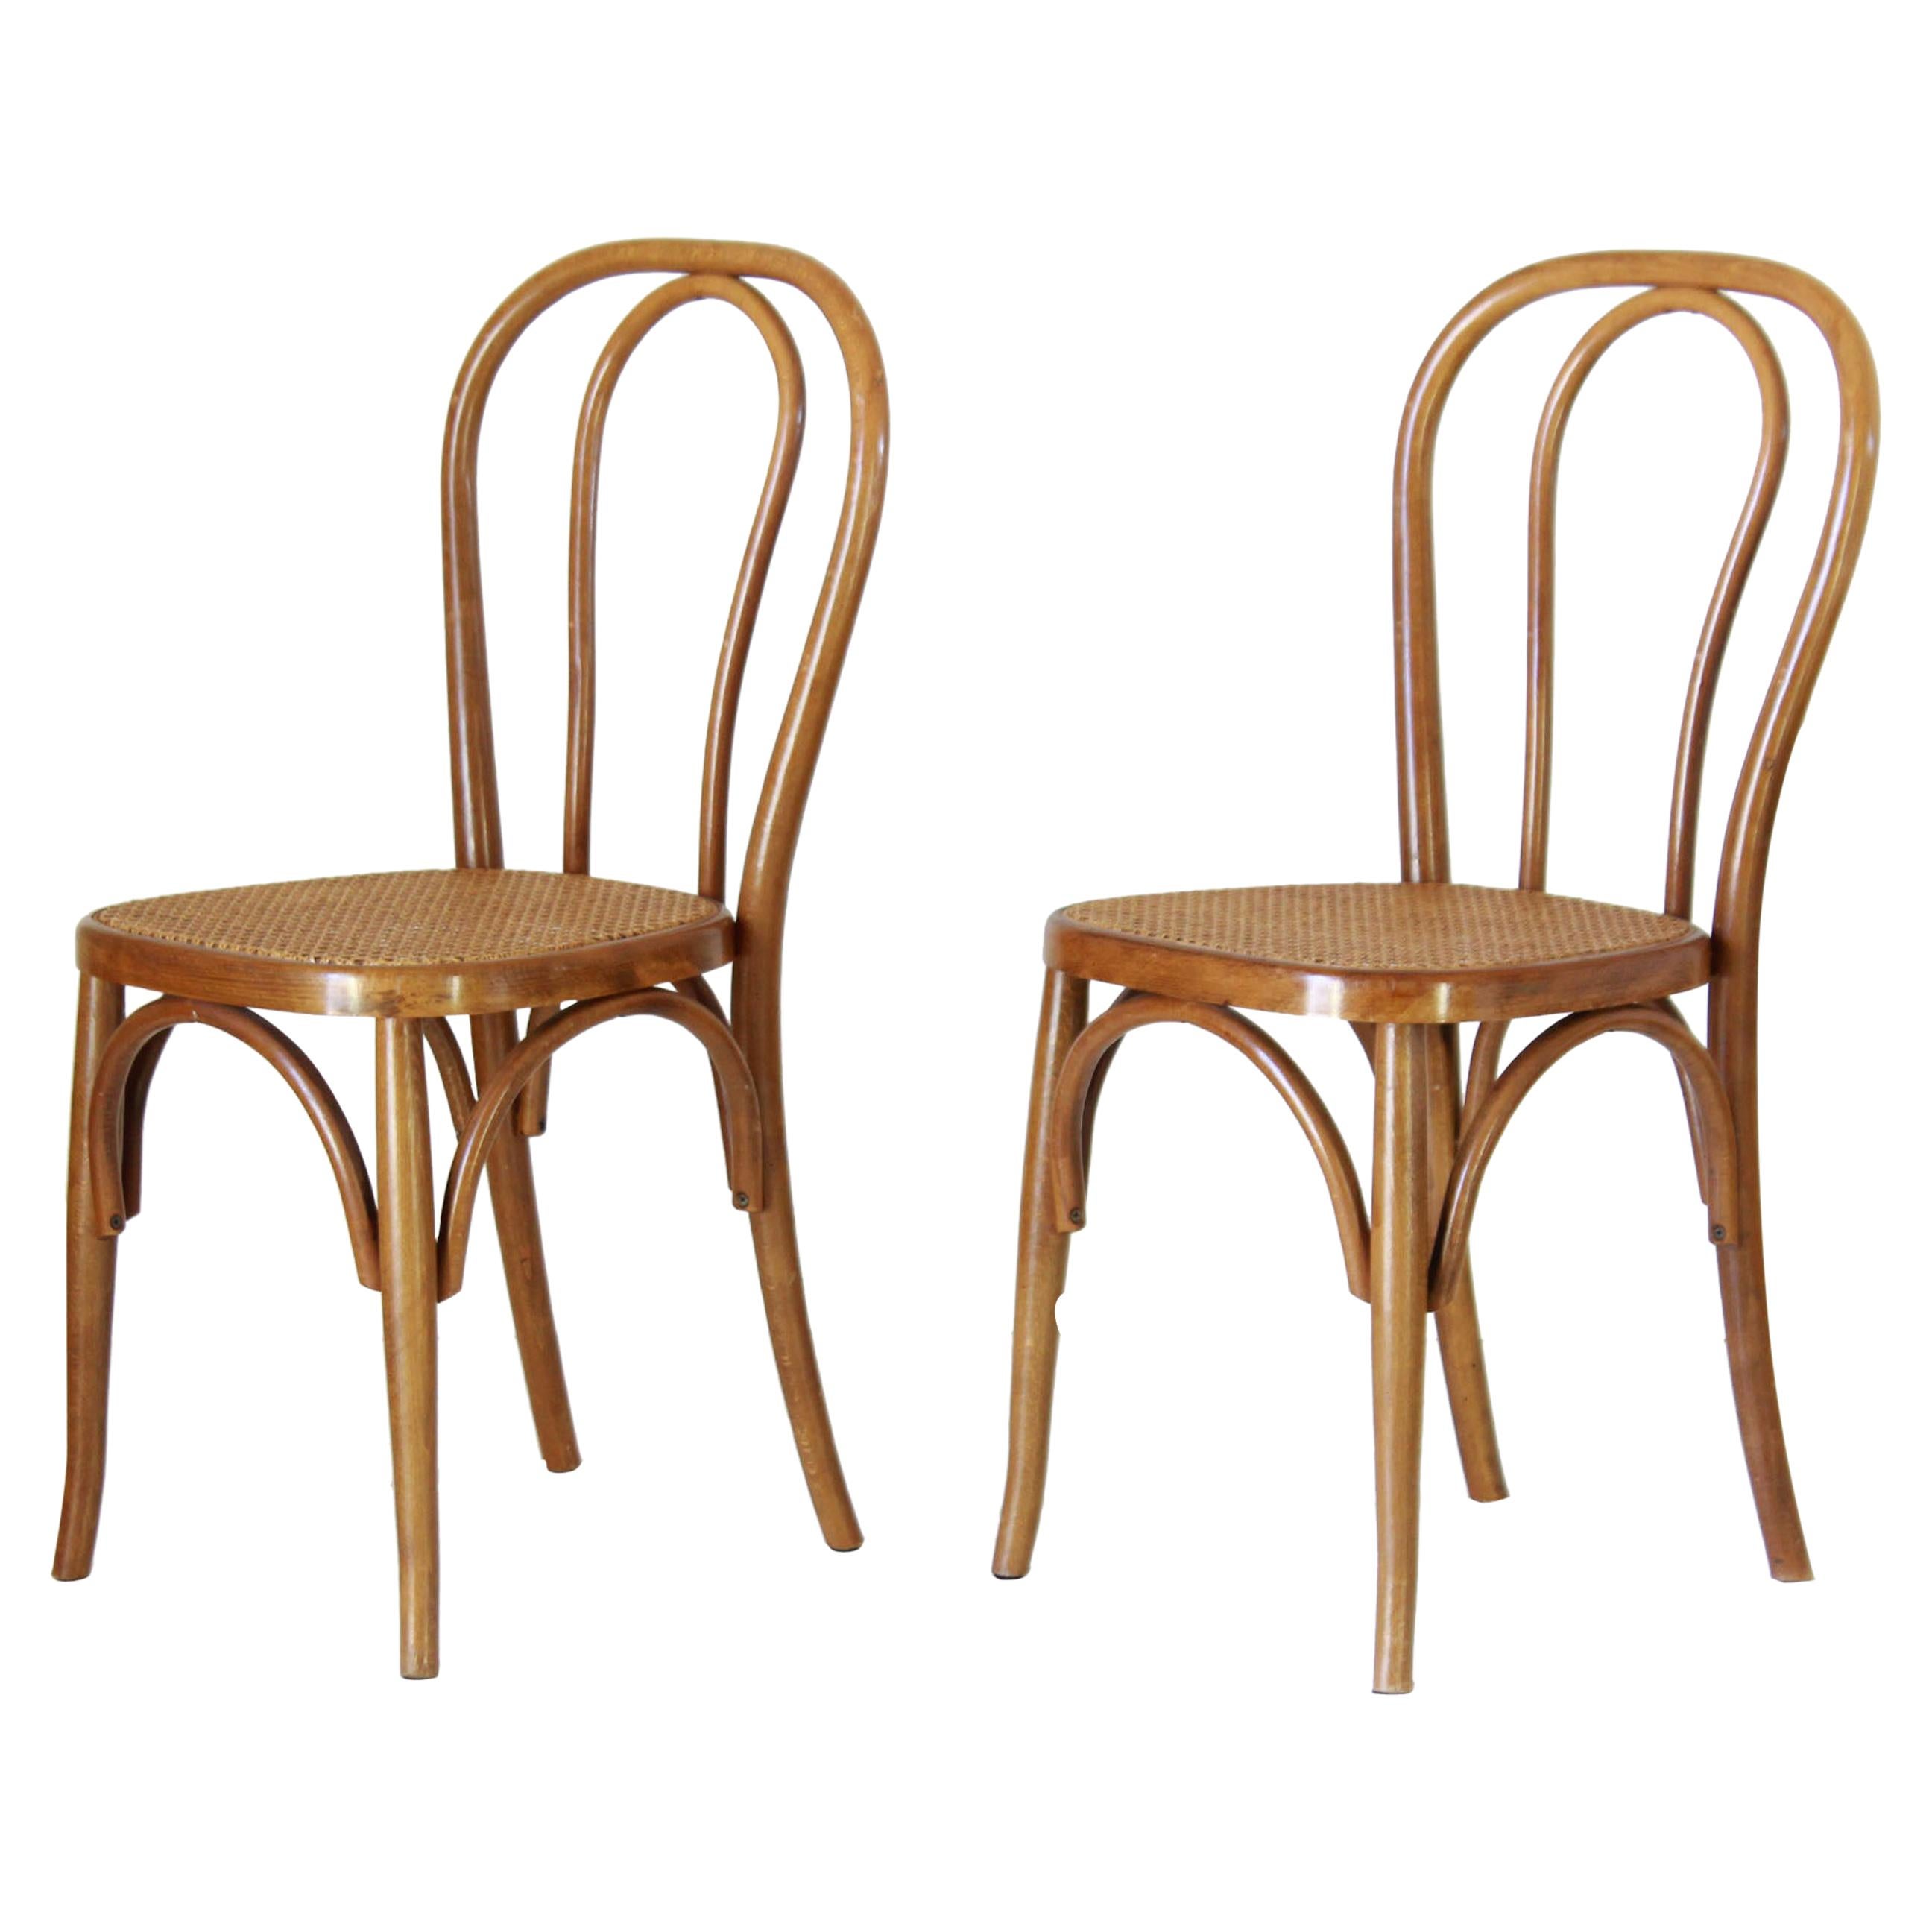 Two Early 20th Century Thonet Style curved Wood Chairs